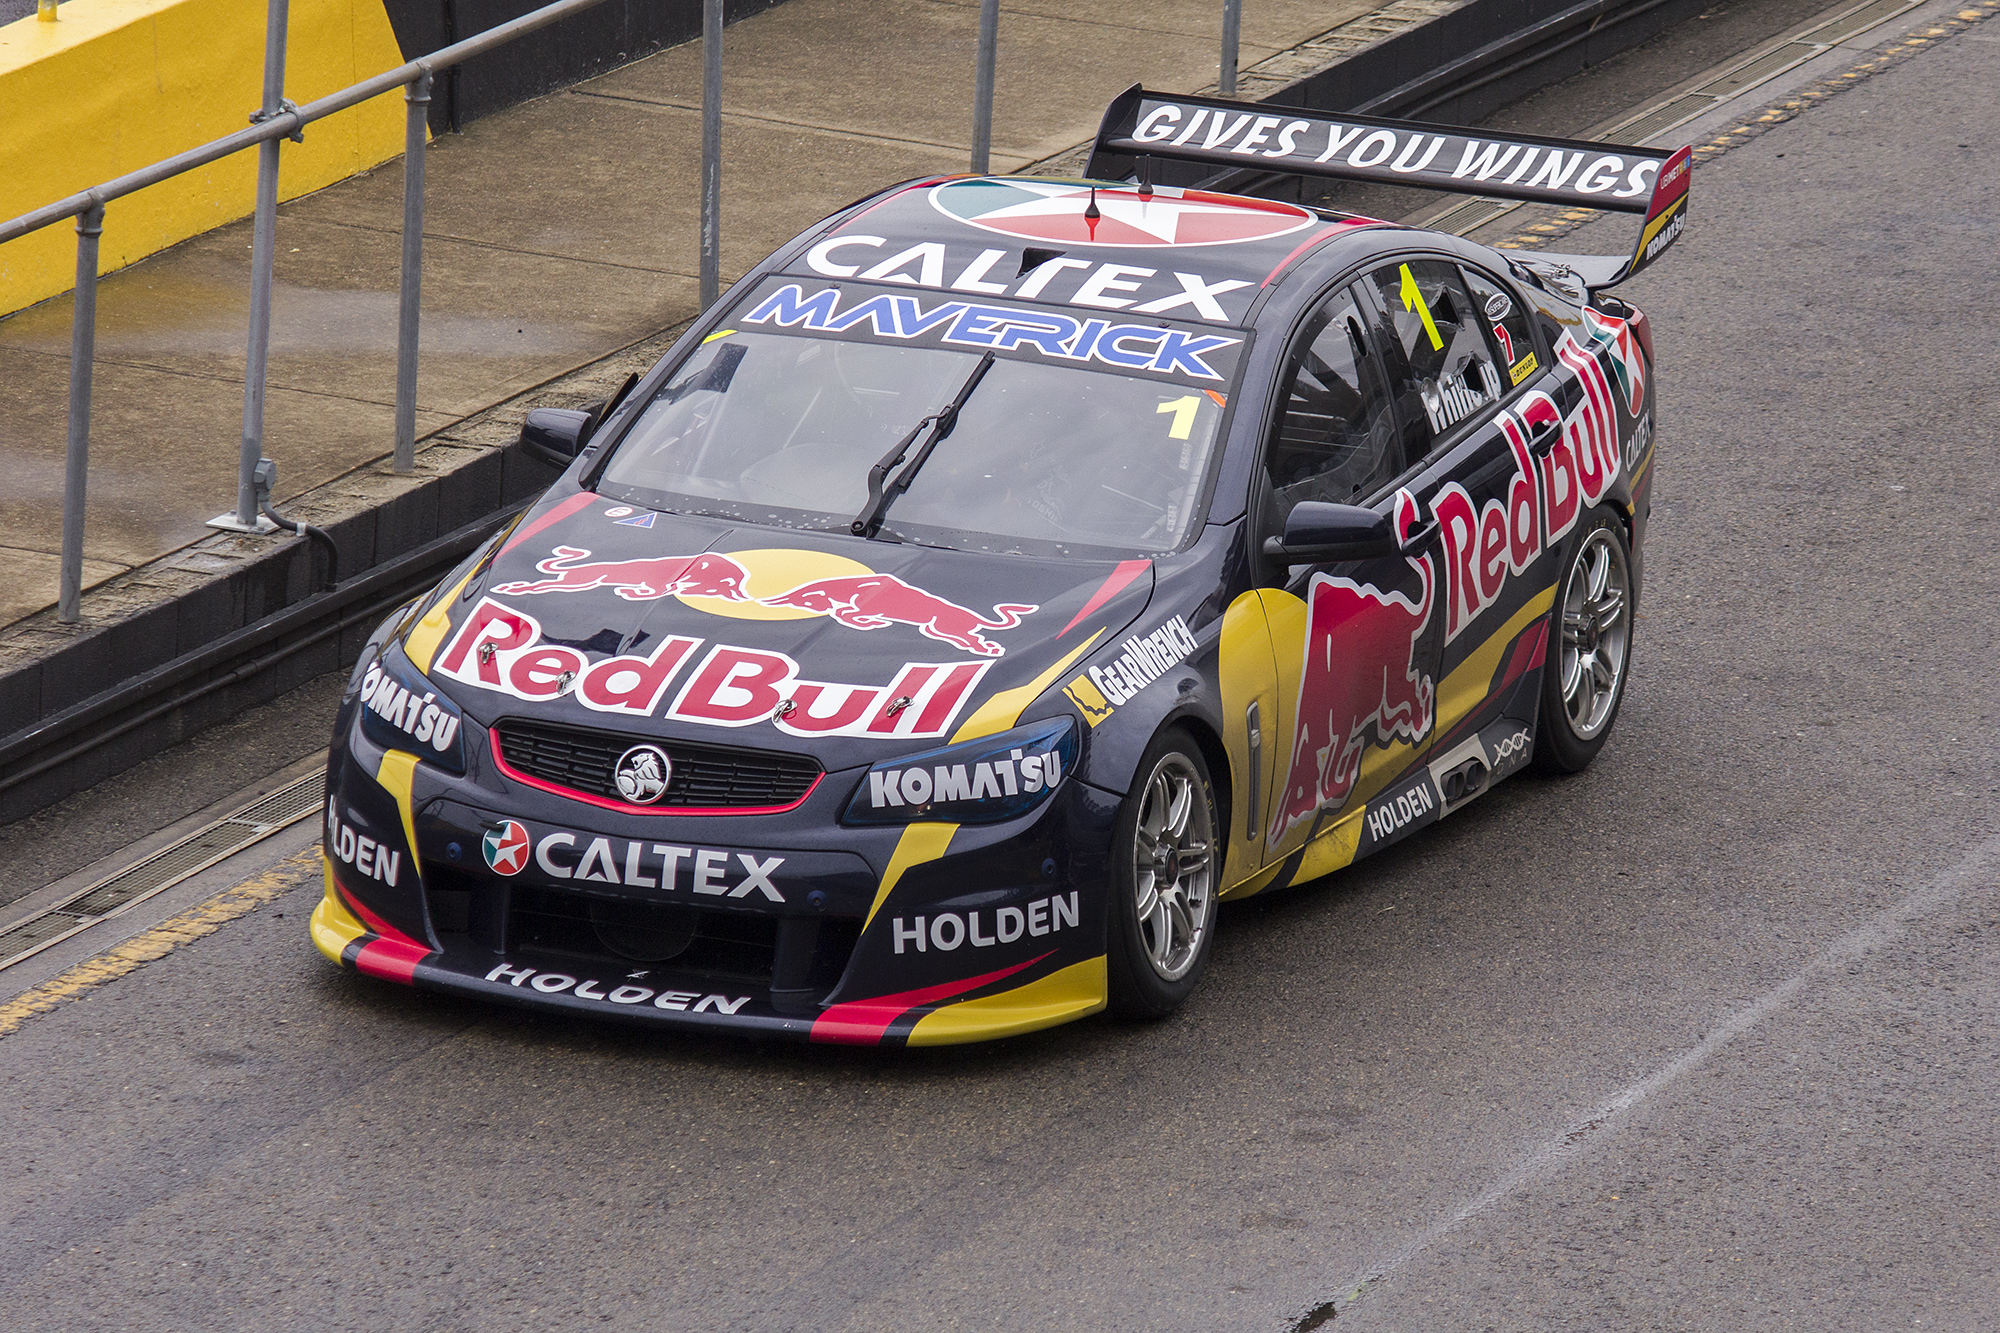 File:Jamie Whincup in Red Bull Racing Australia car 1, pitlane during the V8 Day.jpg - Wikimedia